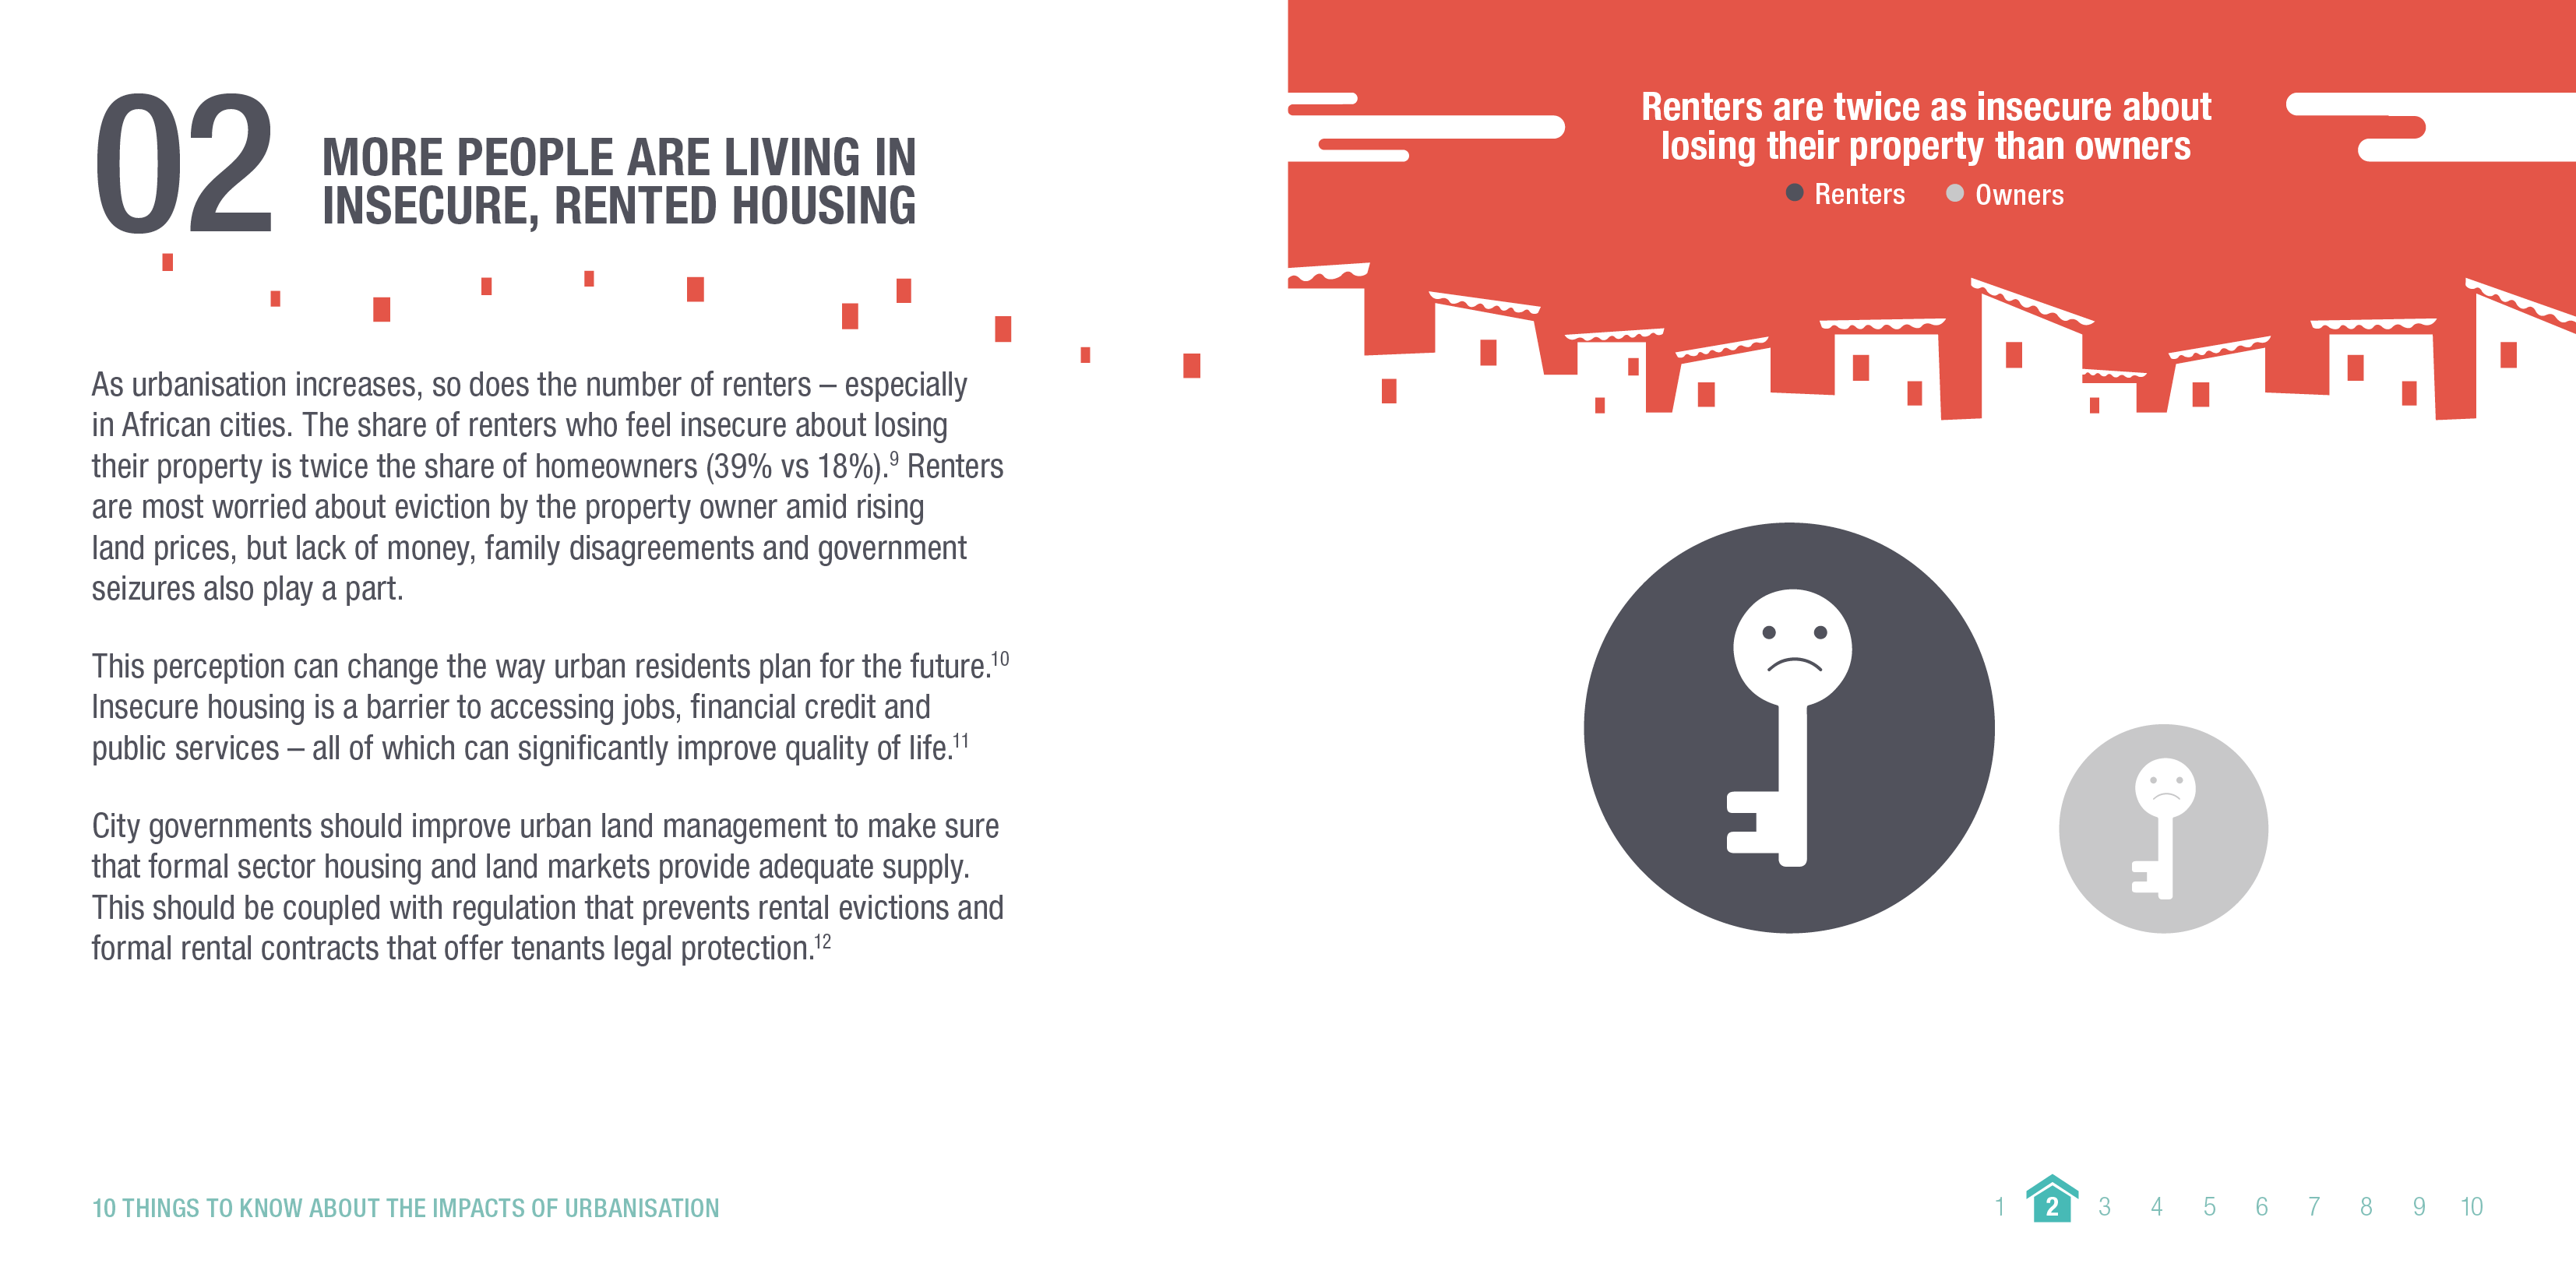 Infographic: More people are living in insecure, rented housing. © ODI 2018.